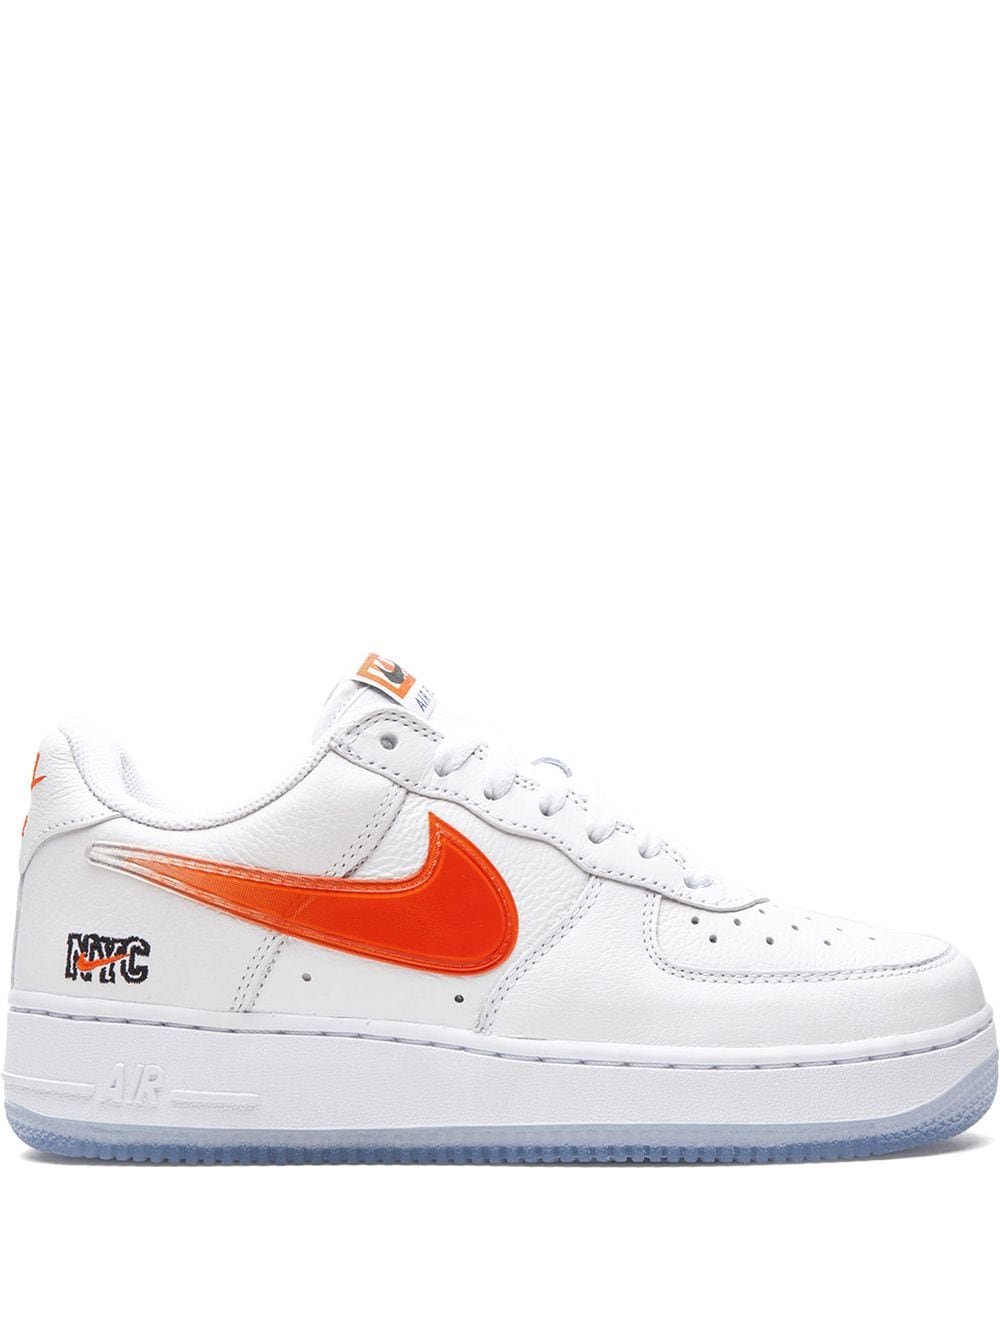 Image 1 of Nike кроссовки Air Force 1 Low